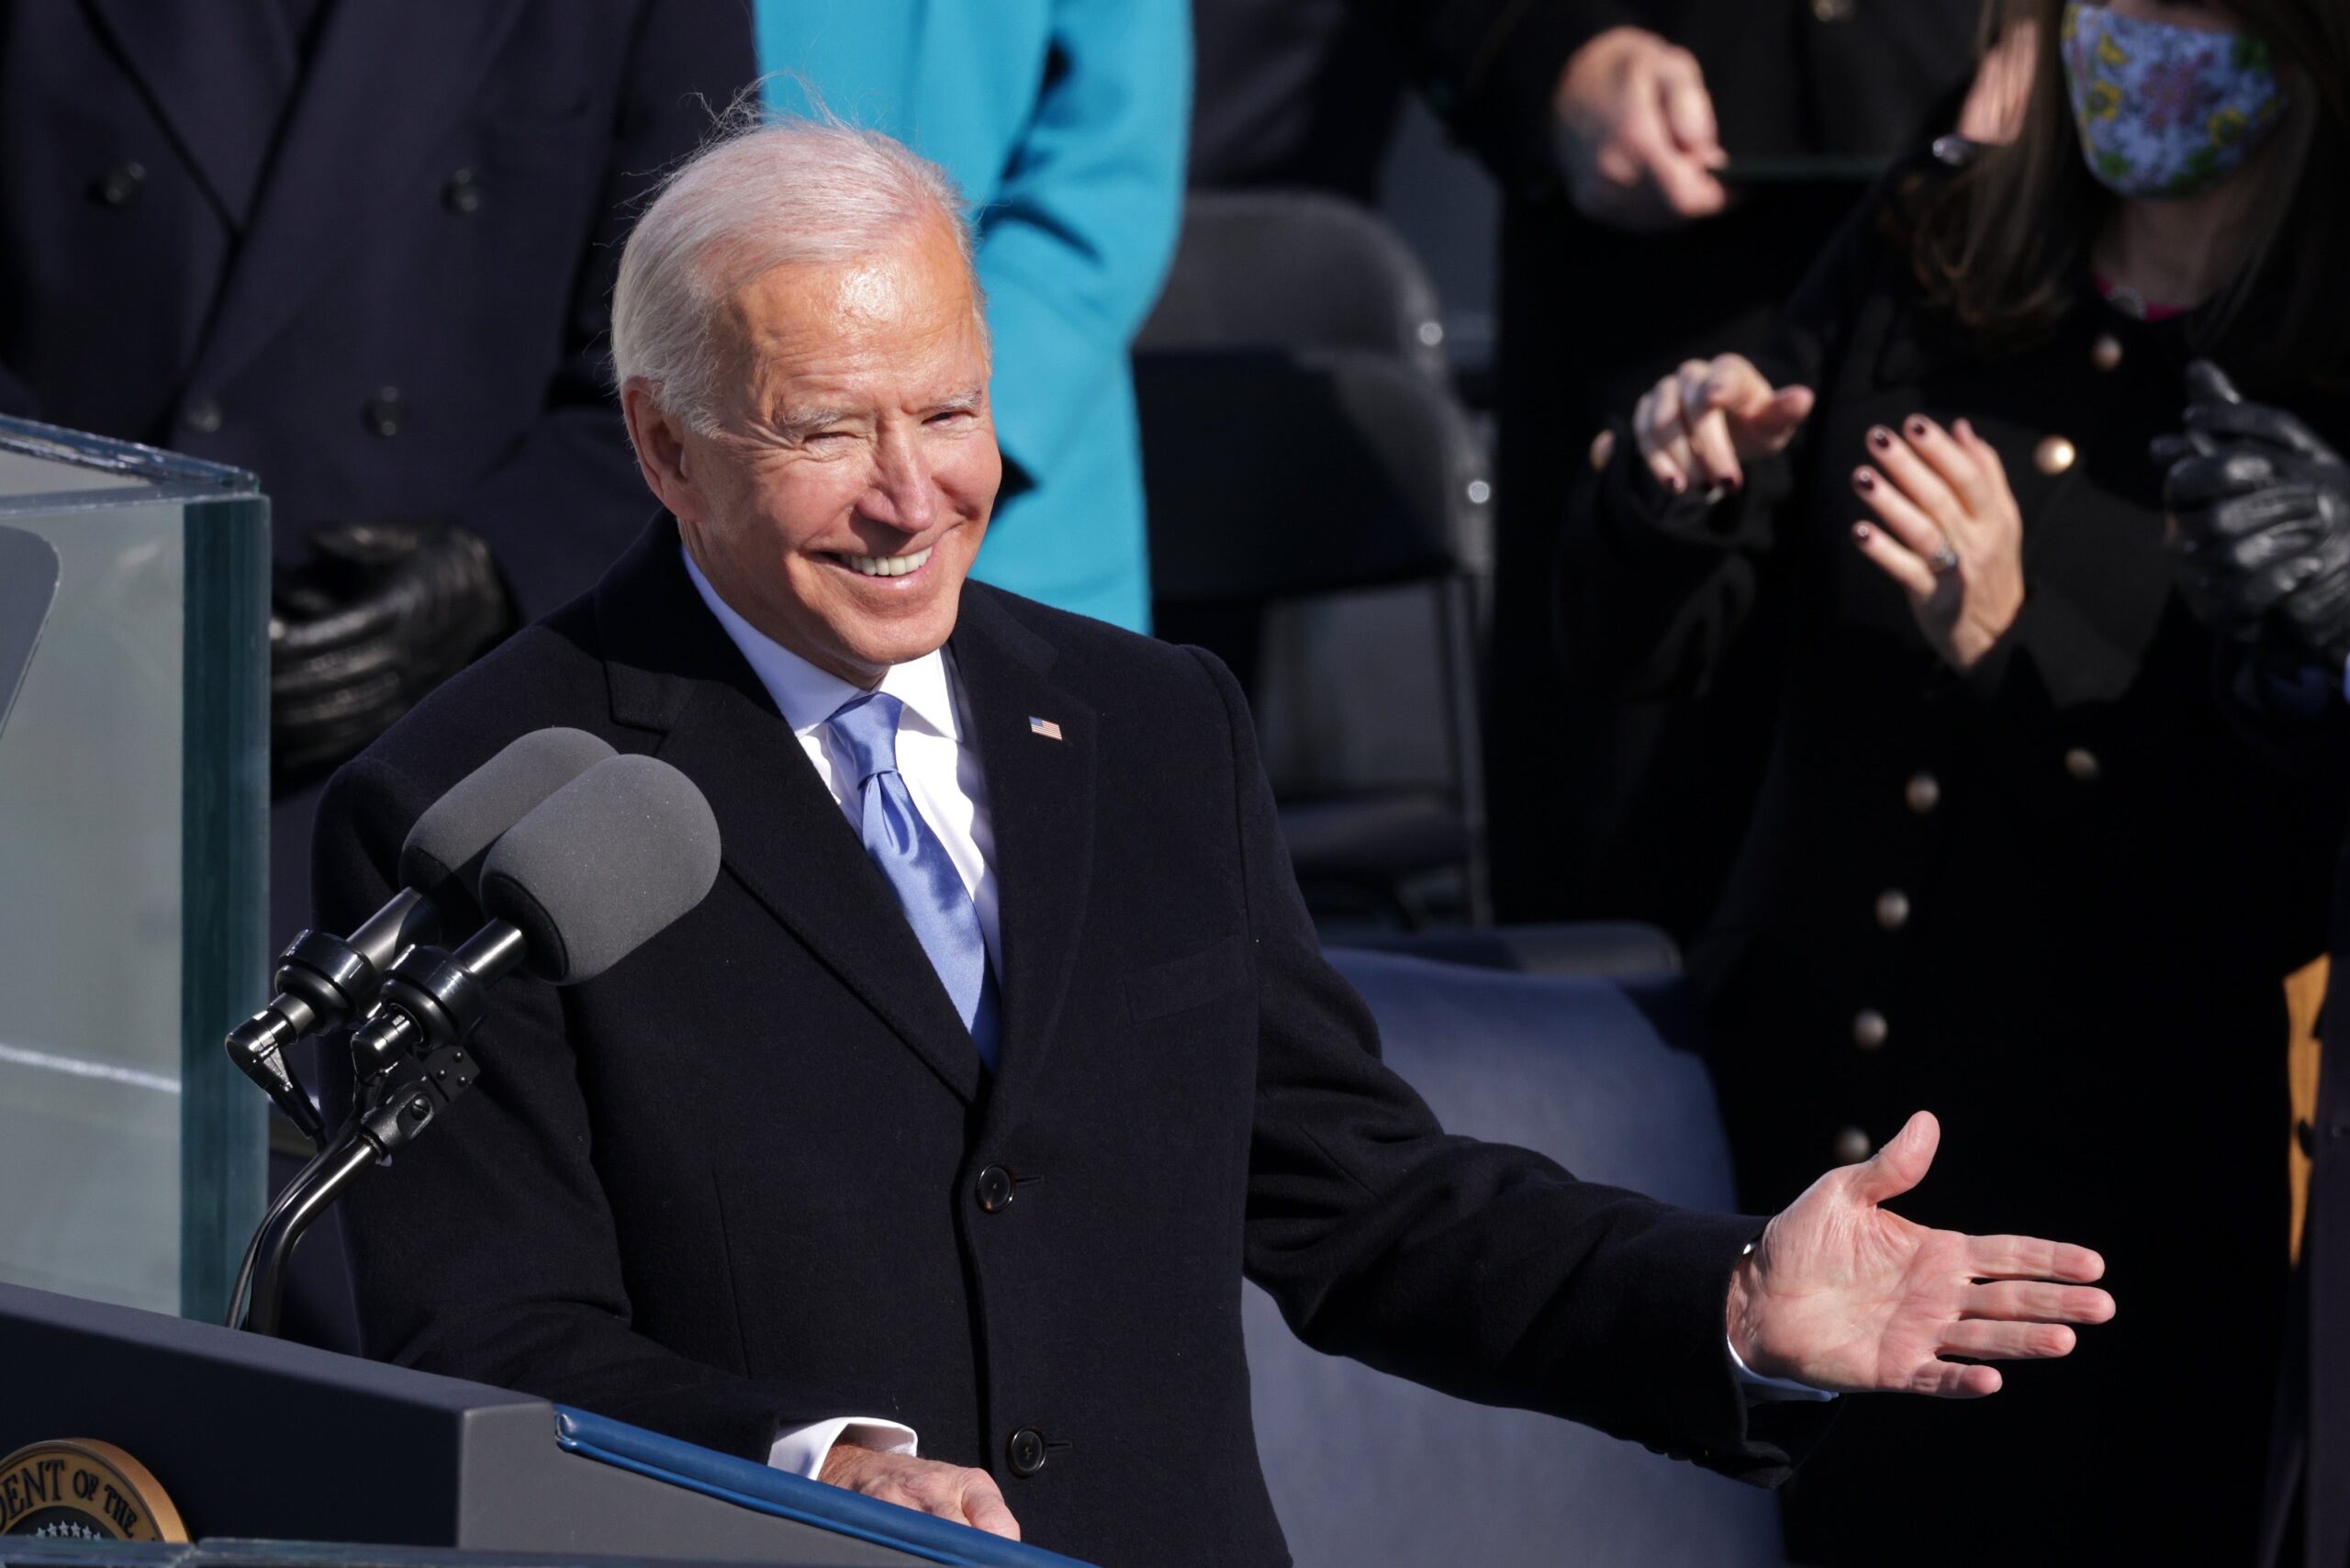 U.S. President Joe Biden delivers his inaugural address on the West Front of the U.S. Capitol on January 20, 2021.